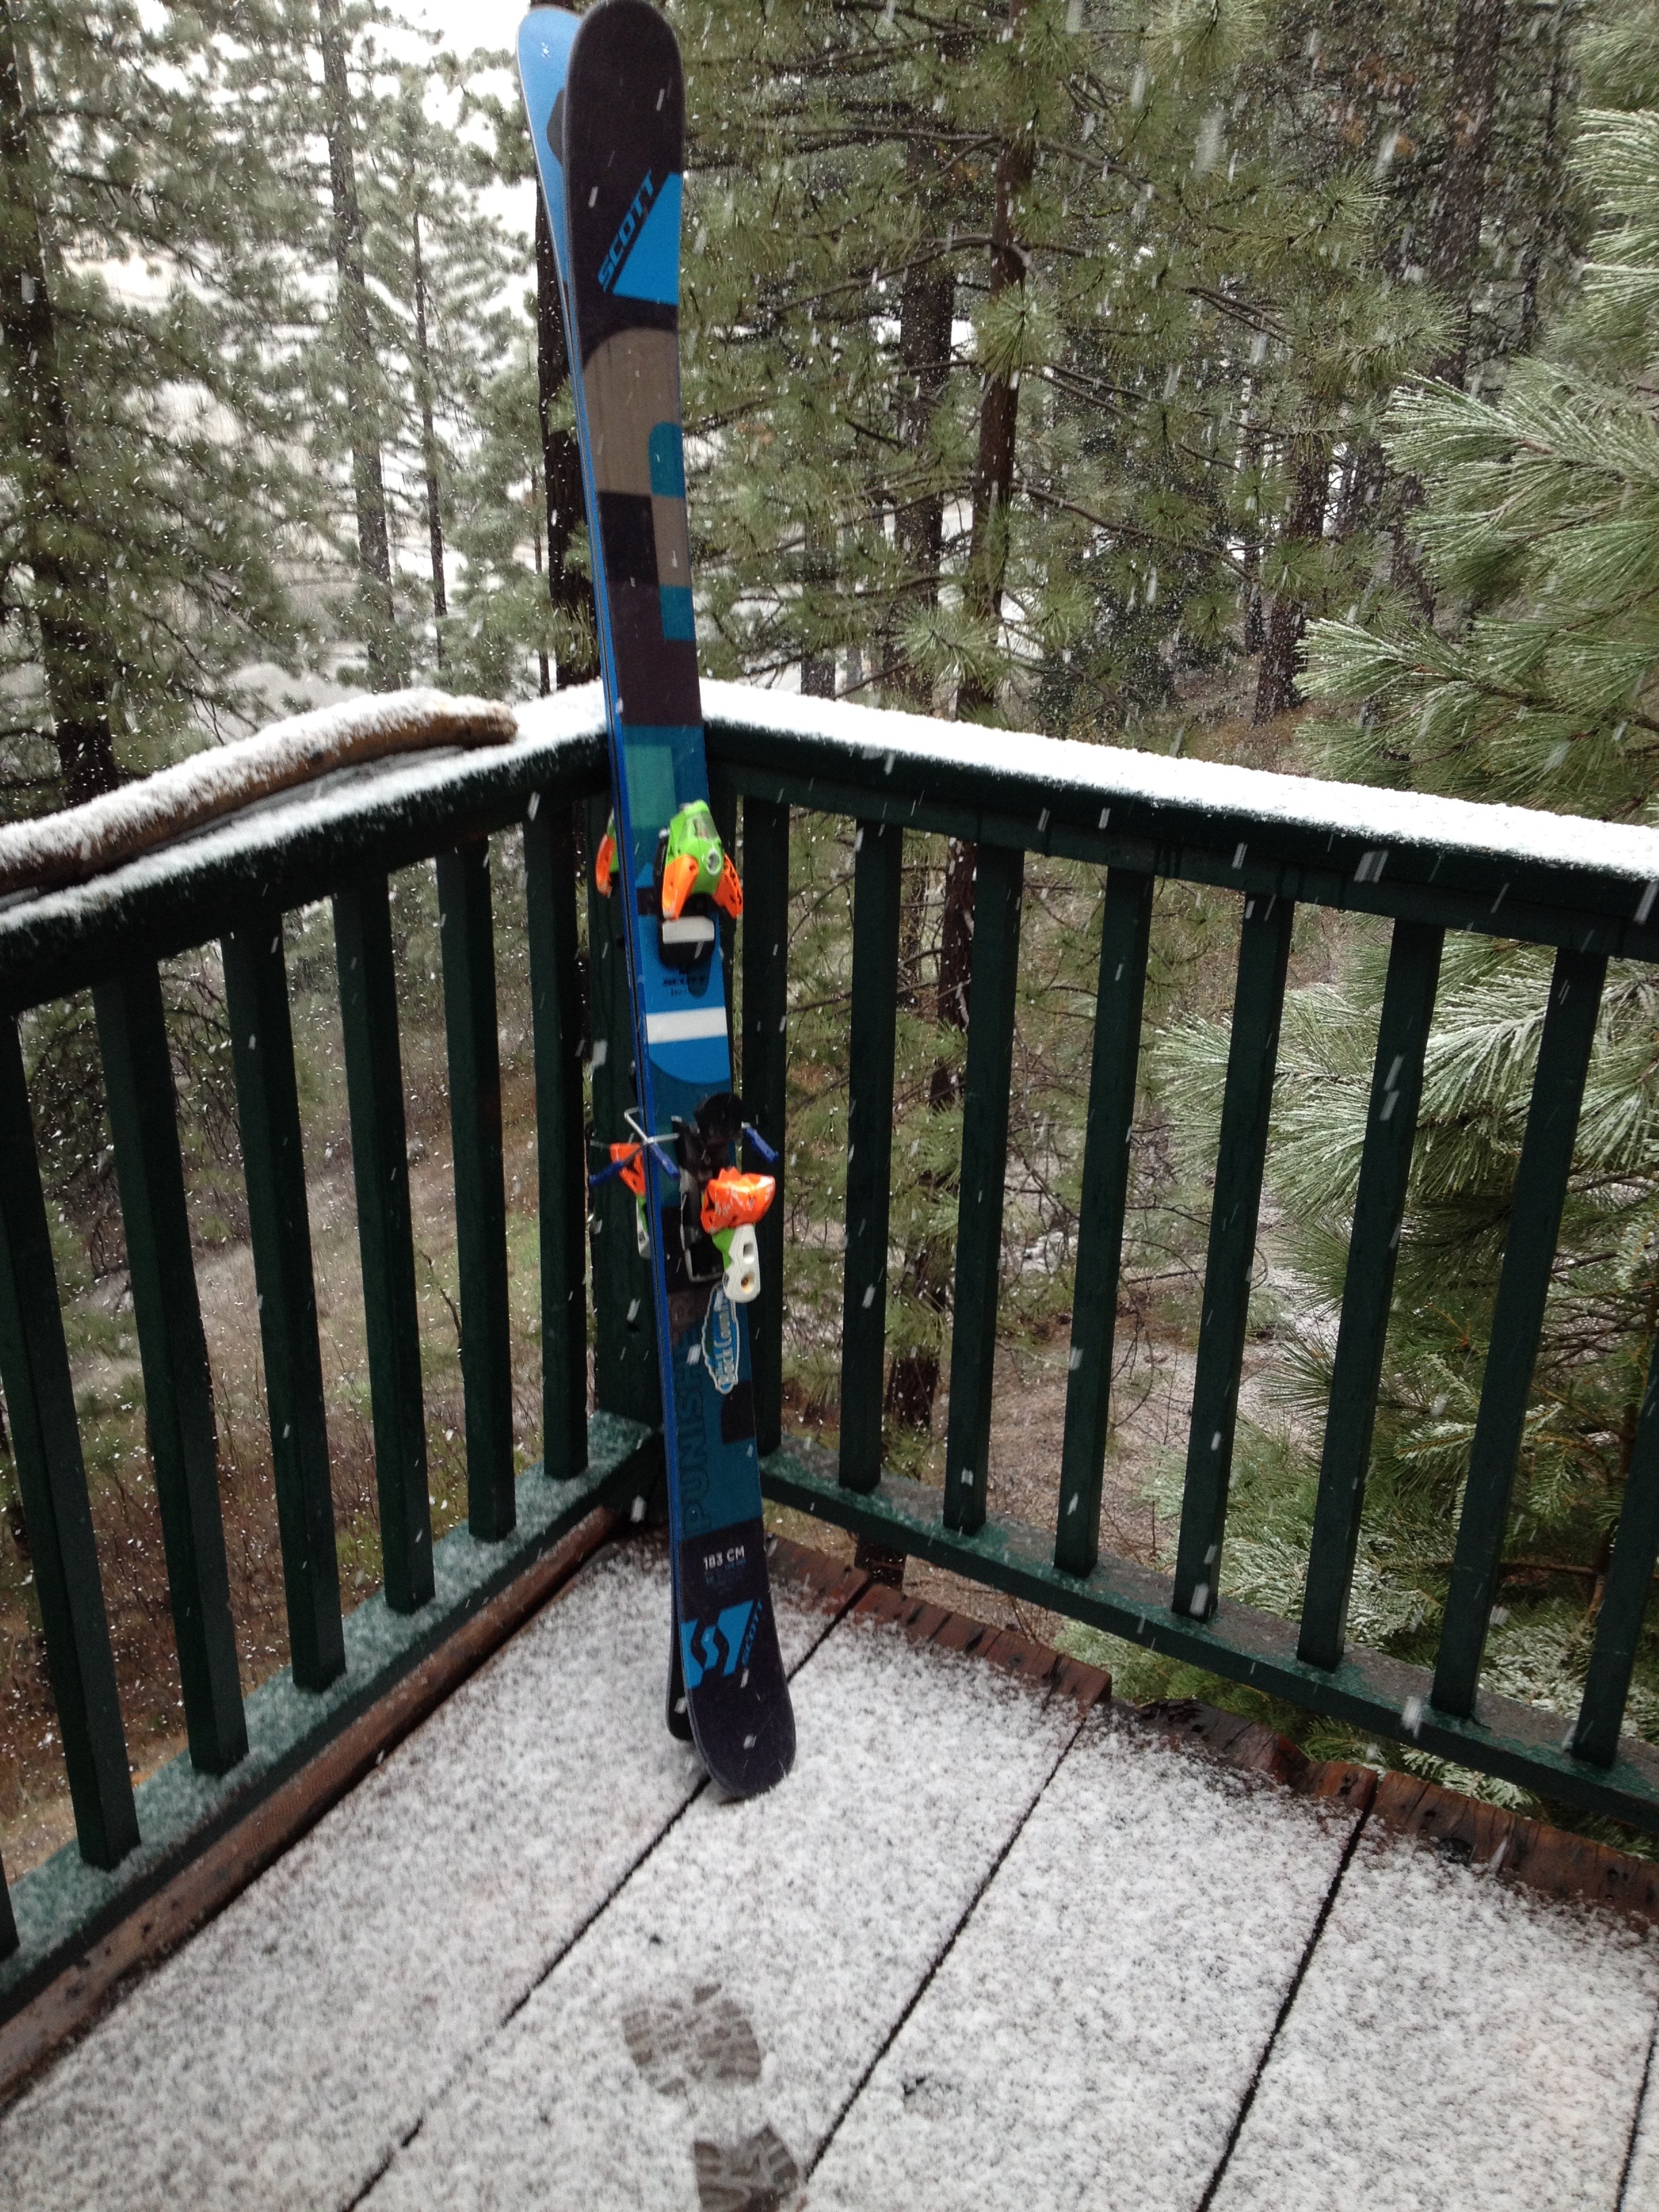 At noon the rain turned to snow and started sticking in Squaw. photo: snowbrains